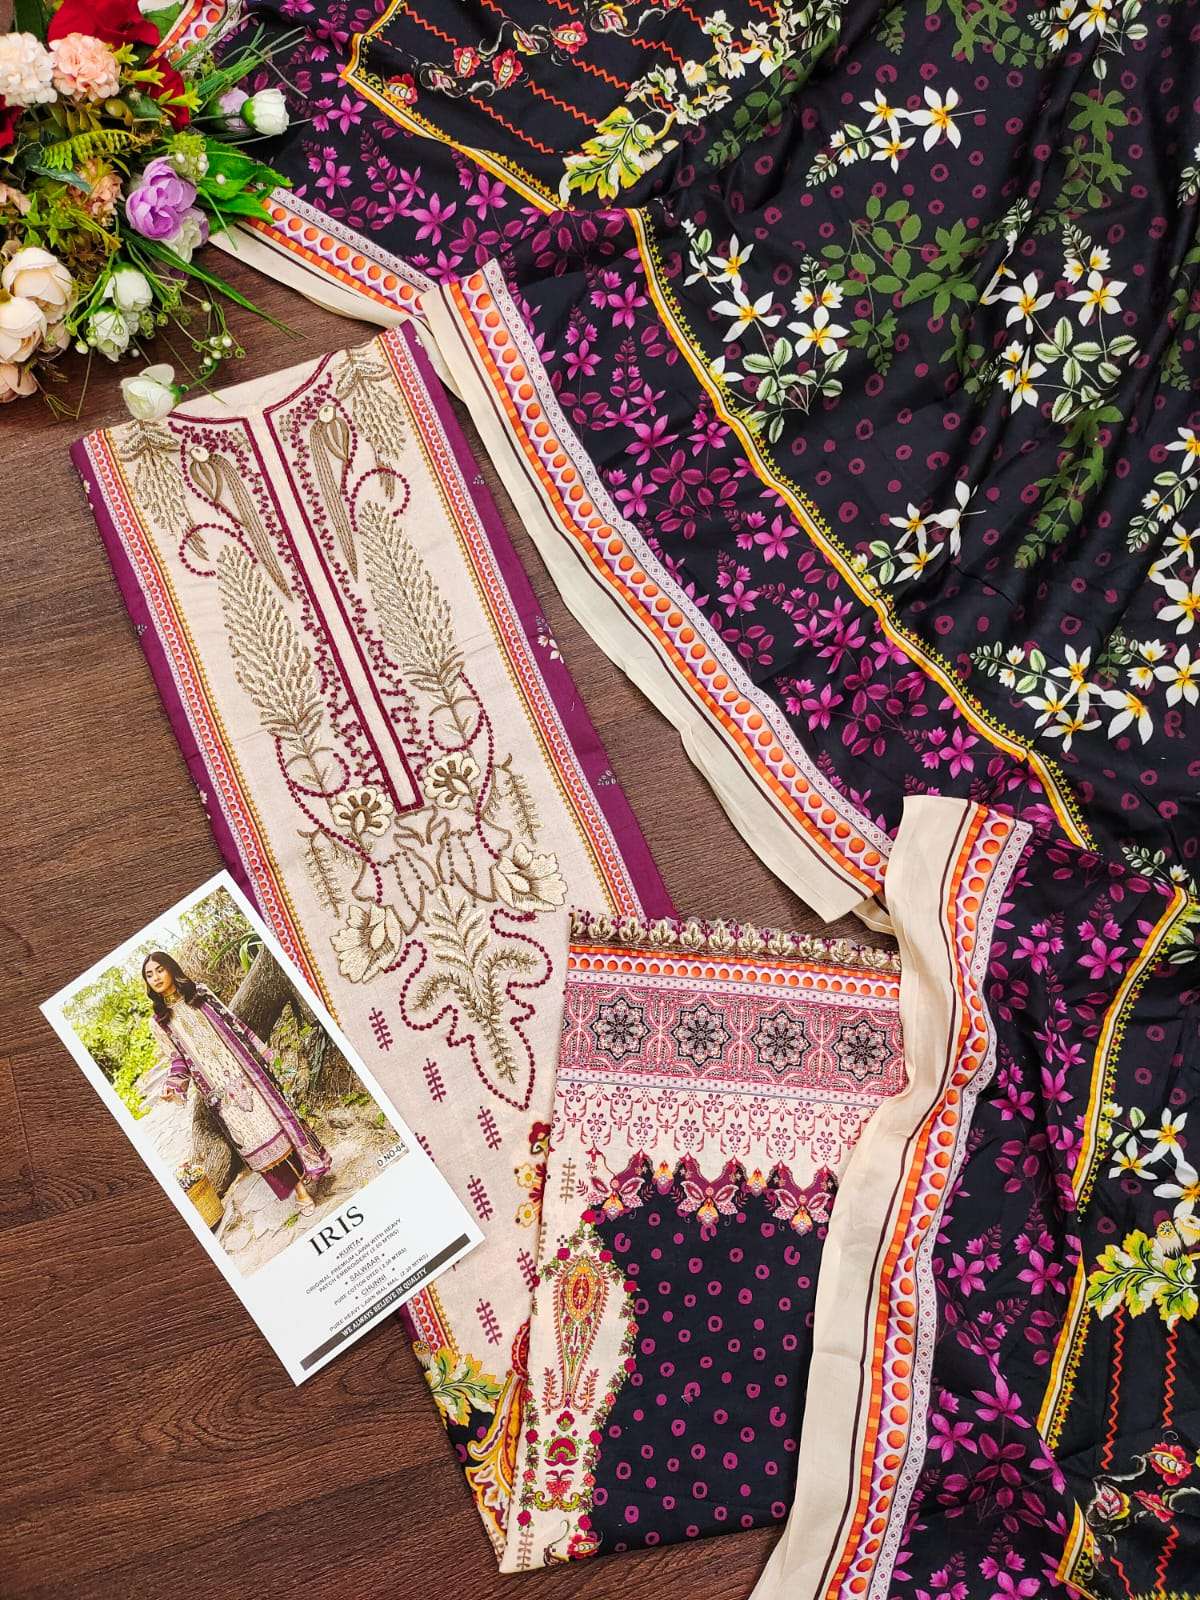 Iris By Fariyas Lawn 01 To 05 Series Pakistani Suits Collection Beautiful Stylish Fancy Colorful Party Wear & Occasional Wear Cambric Digital Print Dresses At Wholesale Price